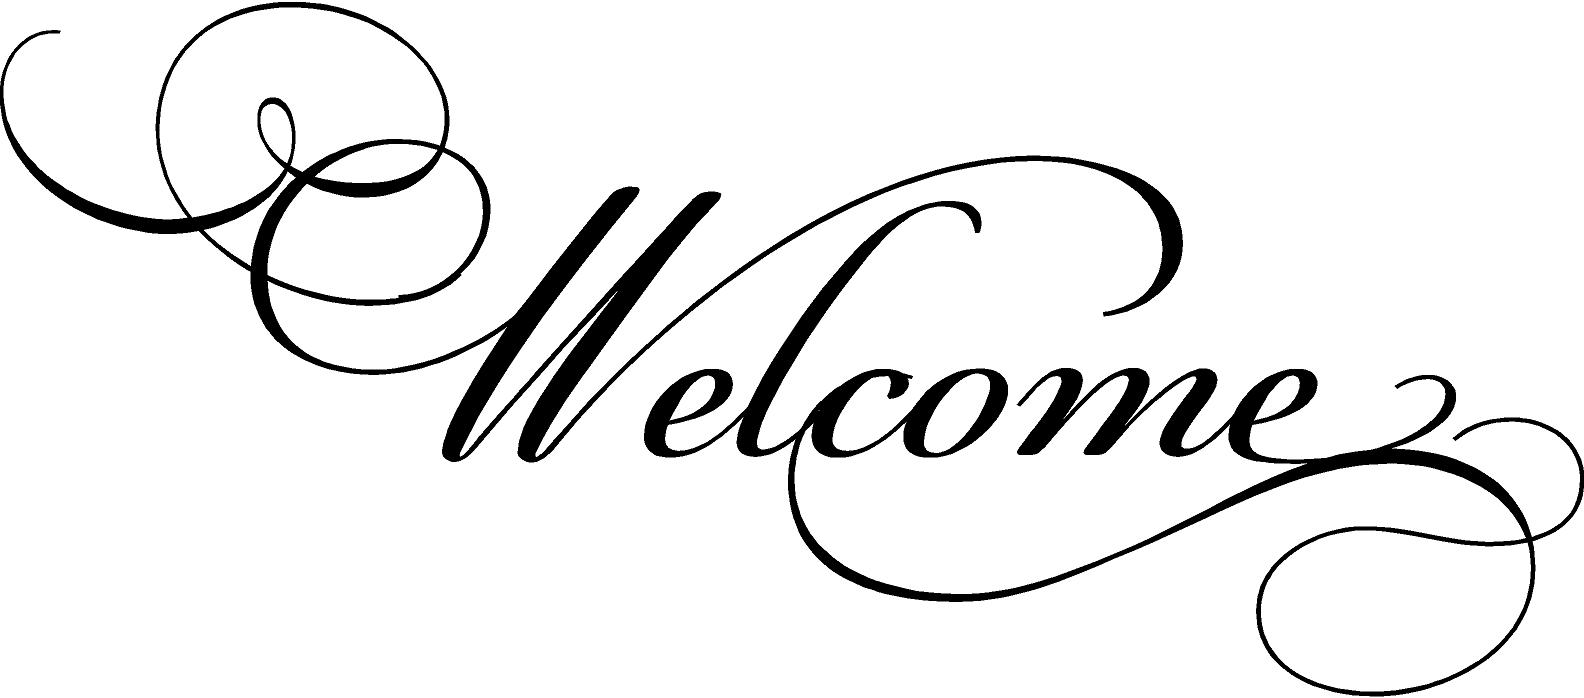 Free Welcome Clipart swirl, Download Free Clip Art on Owips